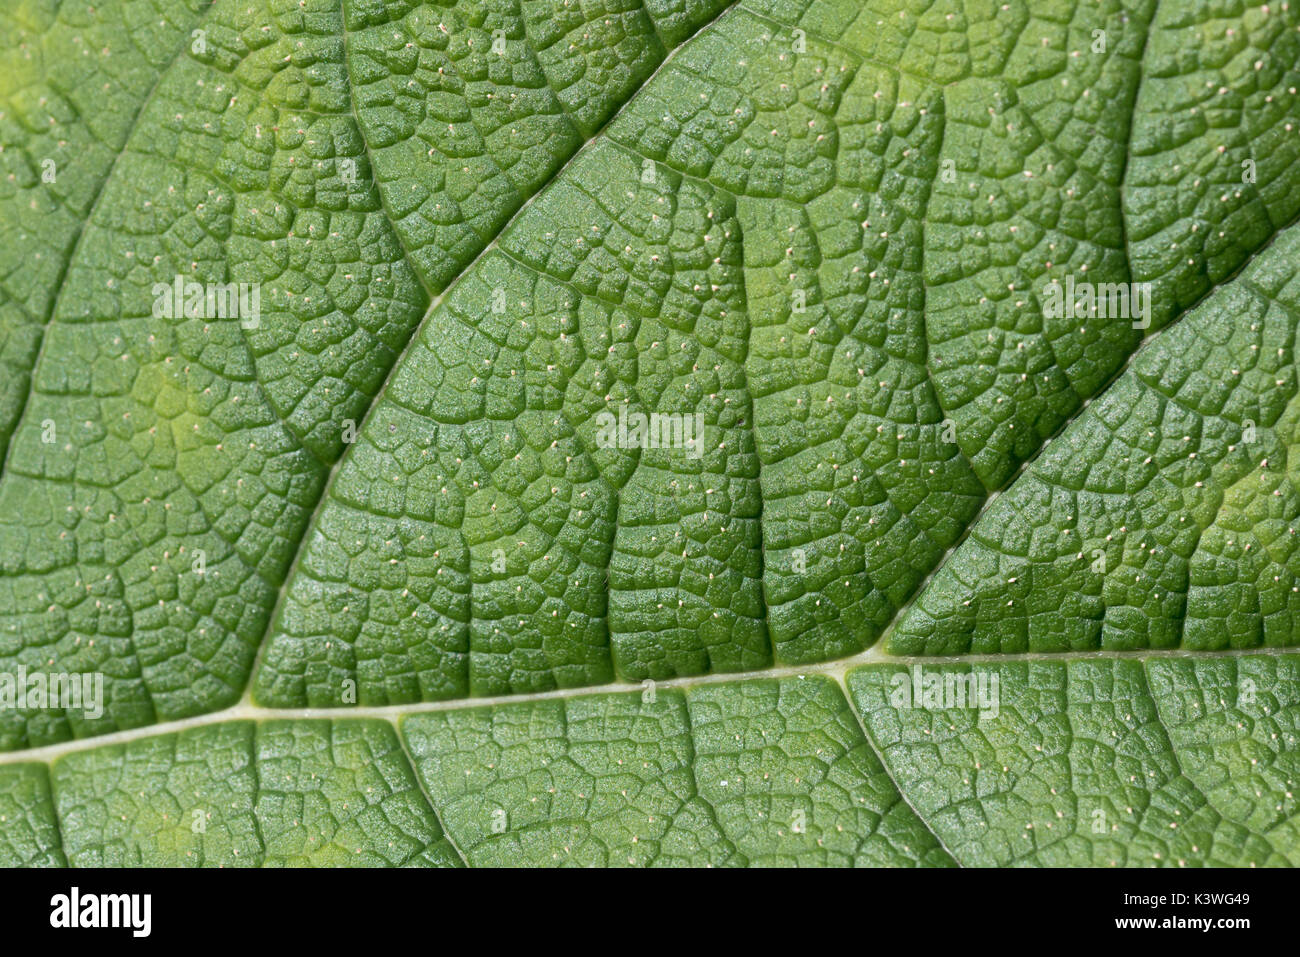 Giant Rhubarb Leaf texture pattern at Kew Gardens in London Stock Photo